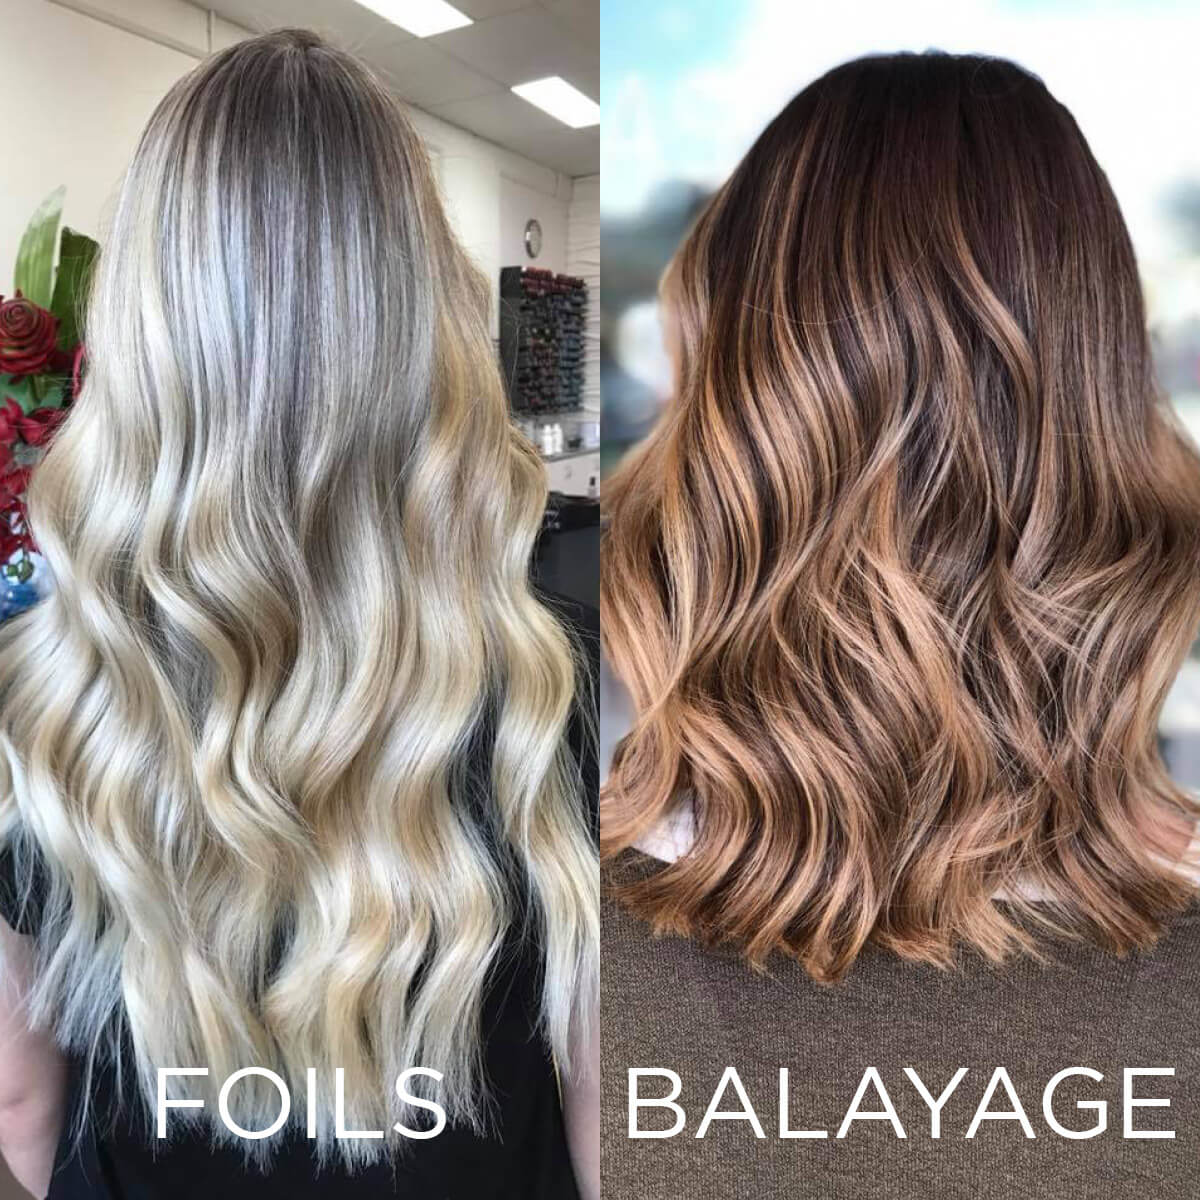 Balayage Or Highlights – Which Is Better? – Medusa Hair Extensions